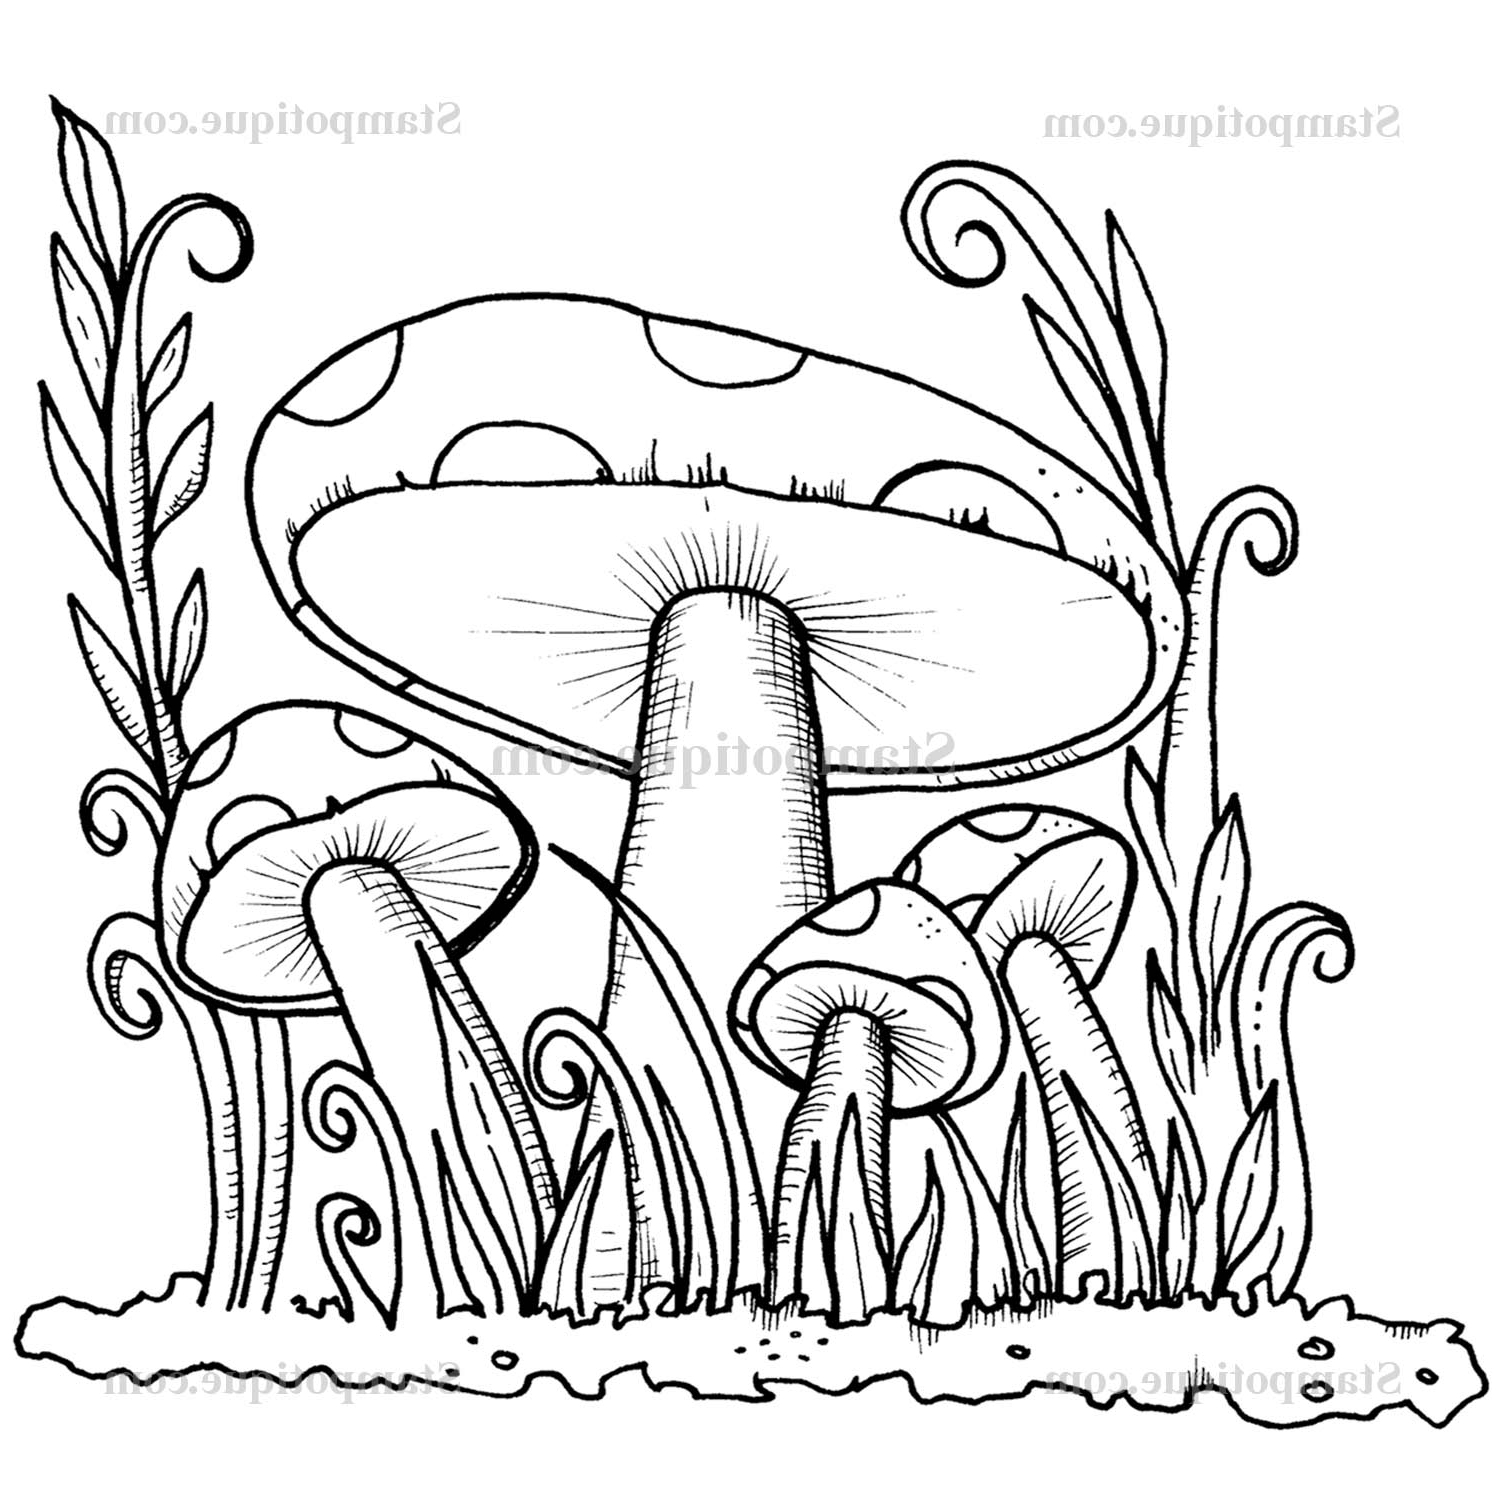 1500x1500 Colorful Mushroom Forest Drawings Colorful Mushroom Forest.